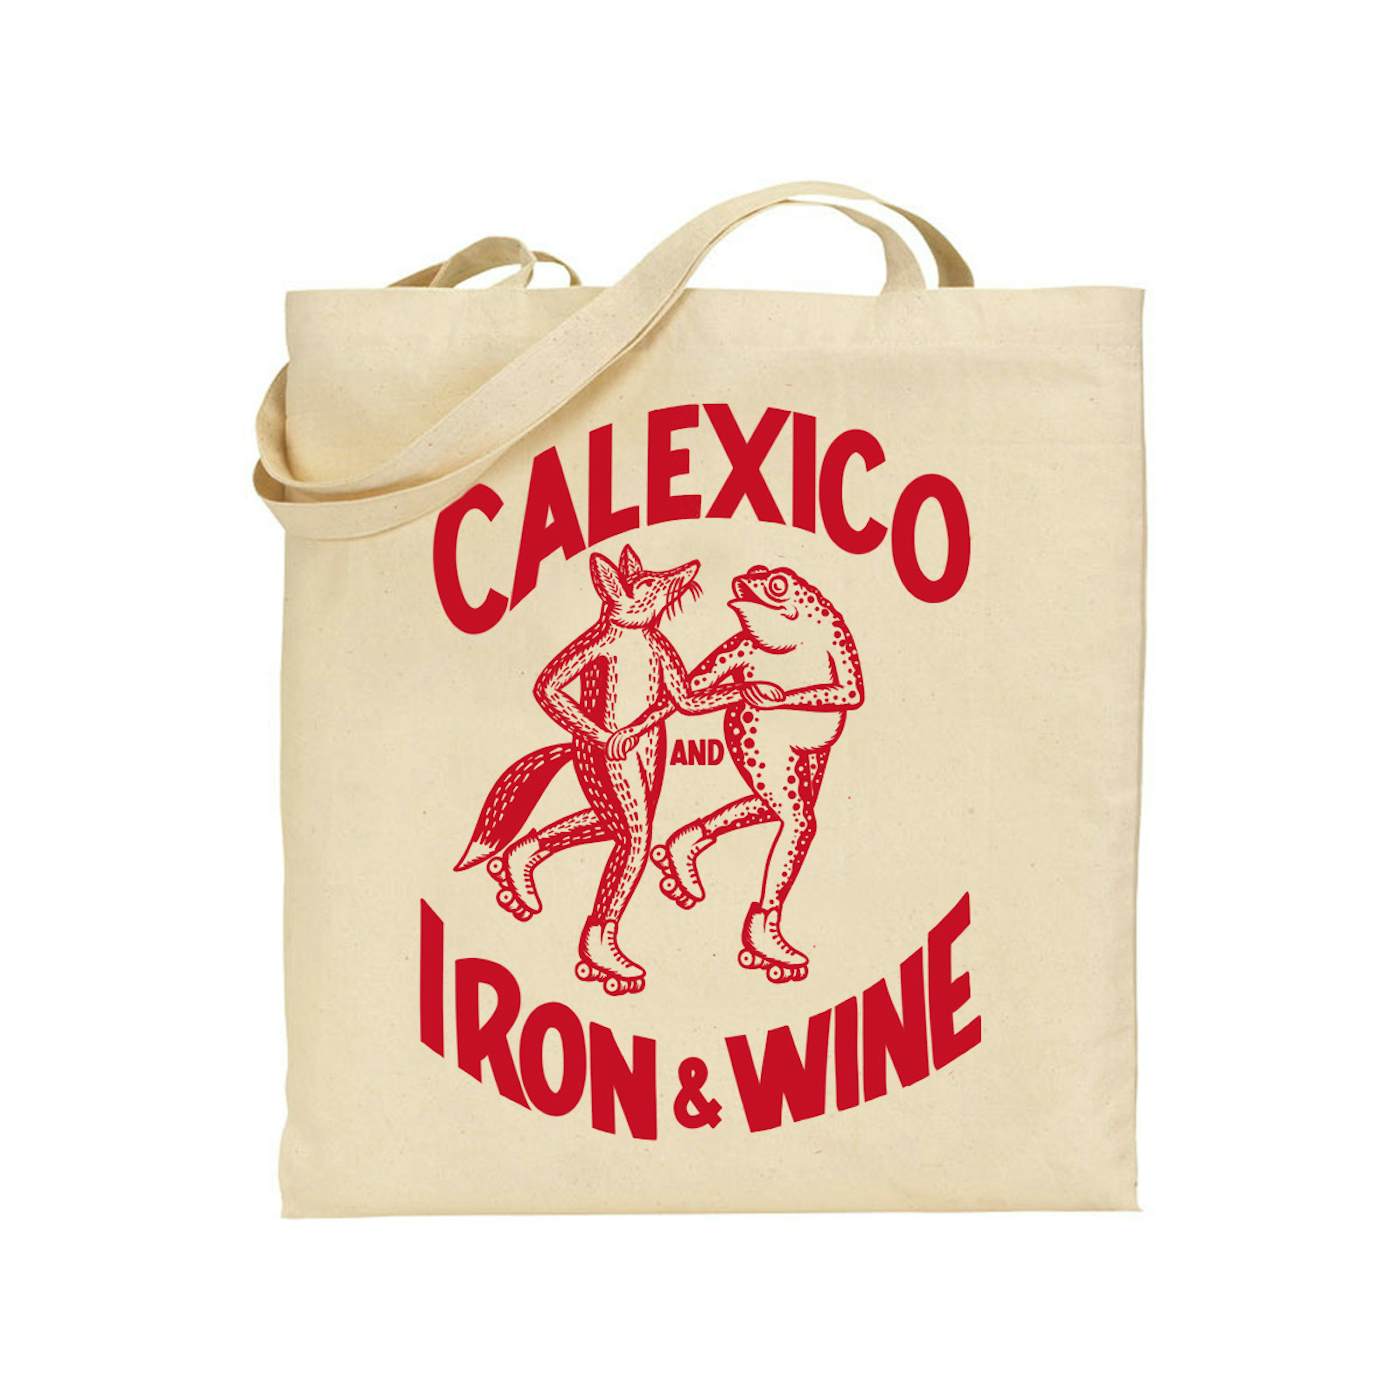 Calexico and Iron & Wine Fox and Toad Tote